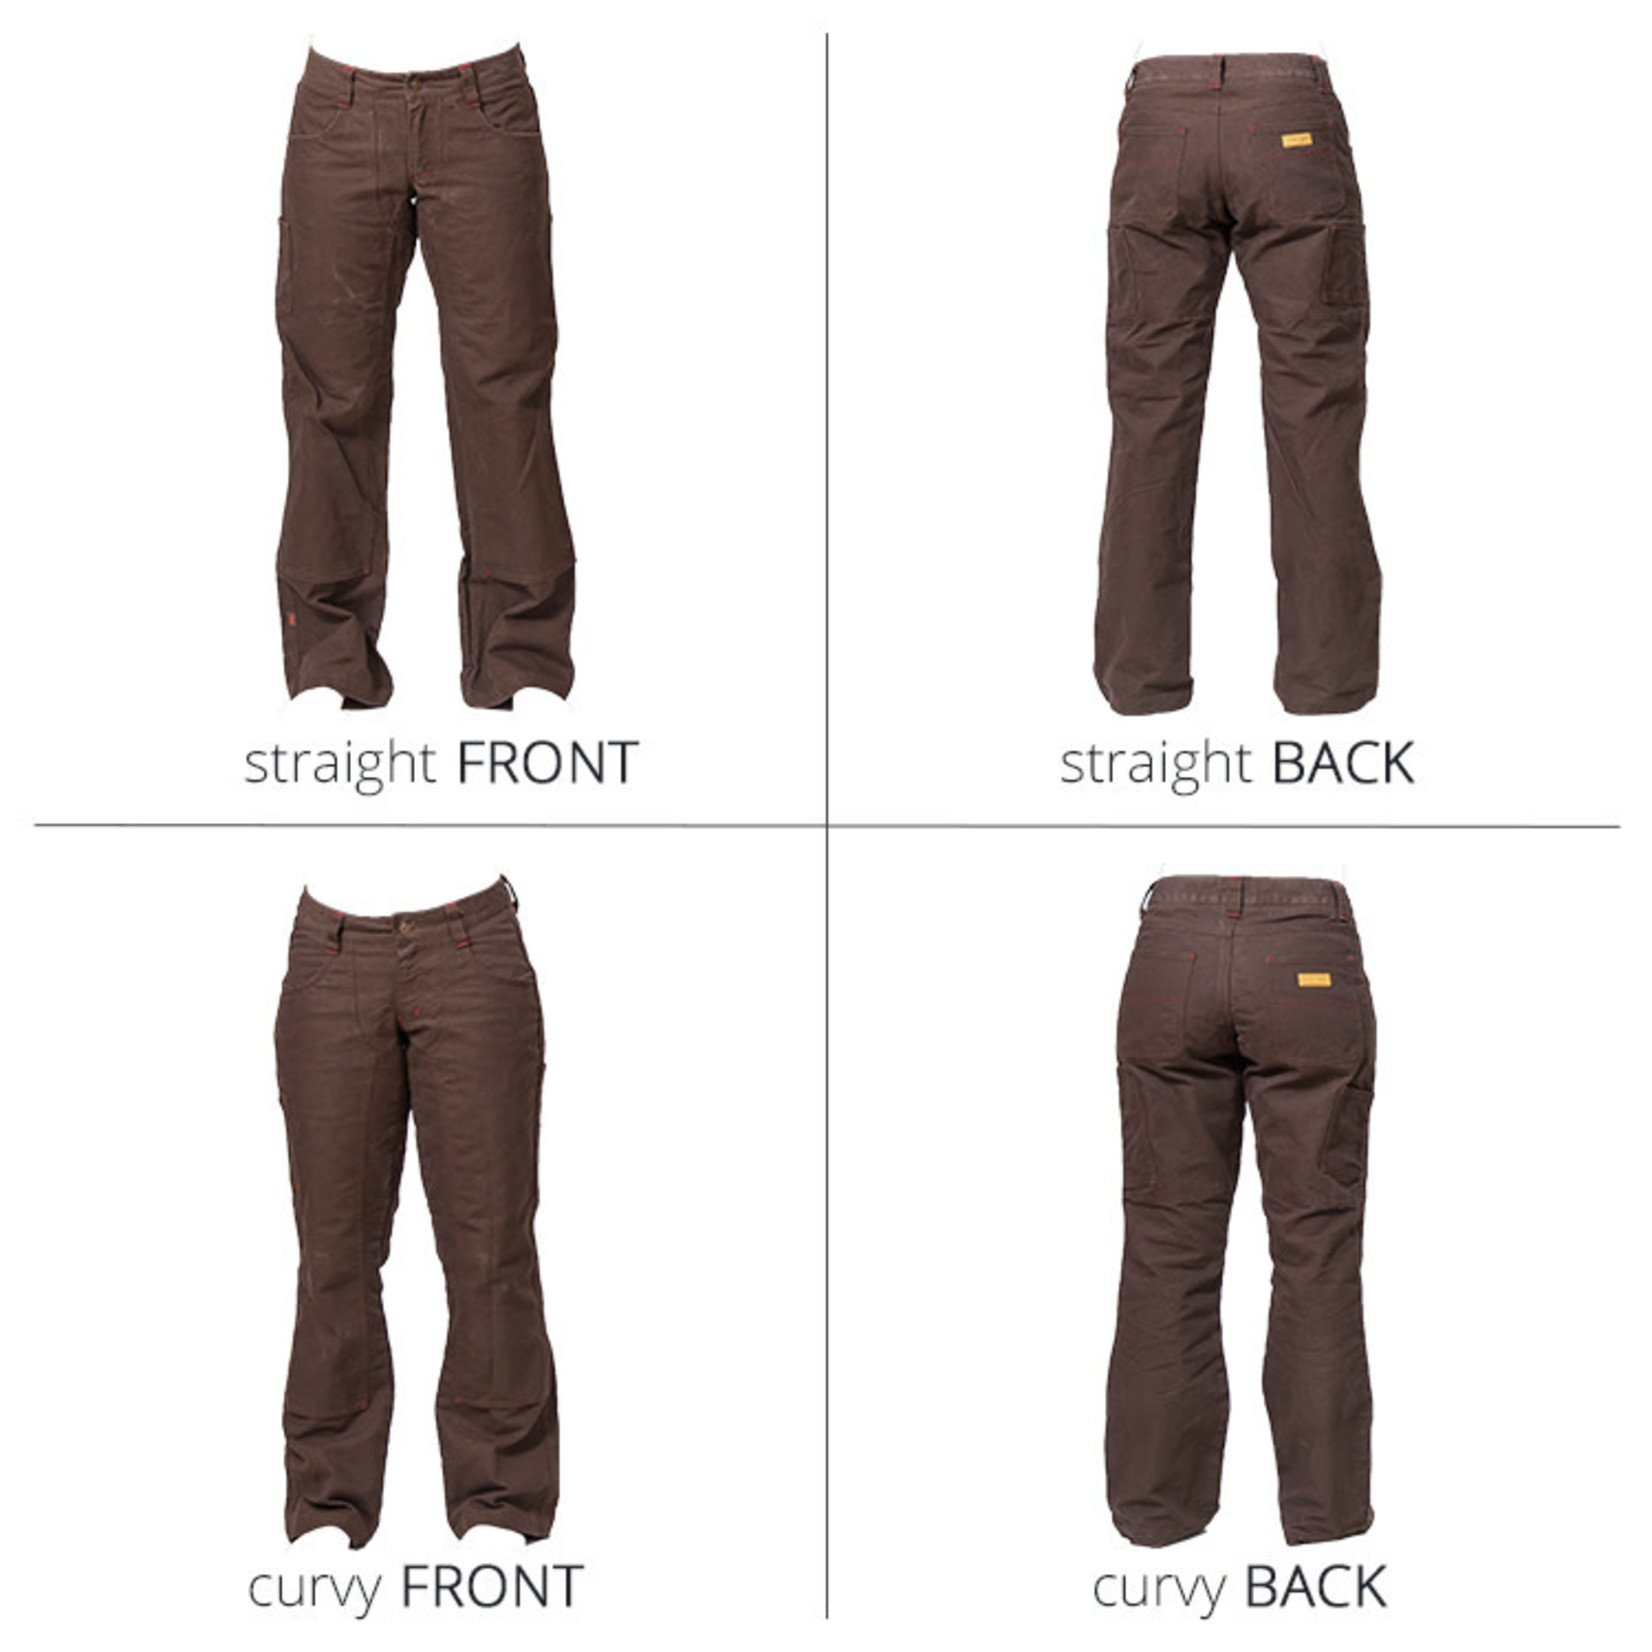 Rugged & Original Fit Work Pants For Women — Ono Work & Safety